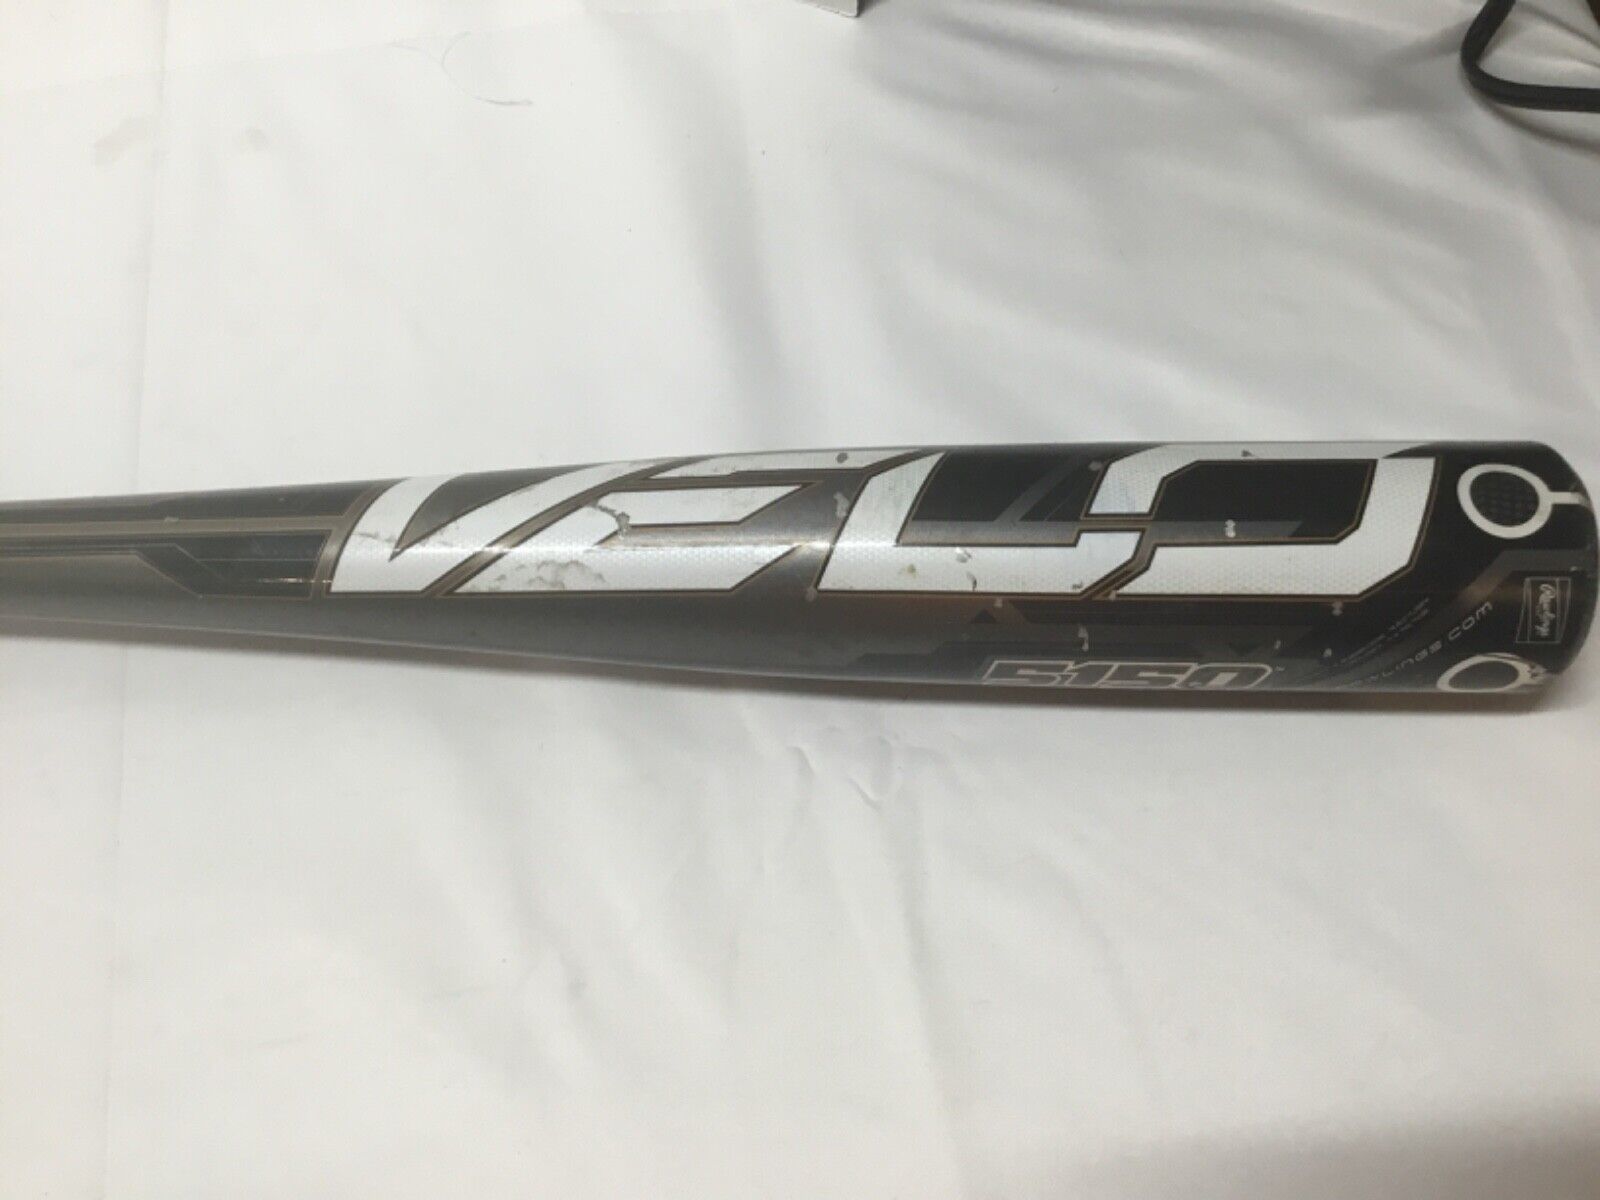 Primary image for Rawlings BBVelo 5150 Alloy 2 5/8 Barrel  31/28 -3 Bat pre owned